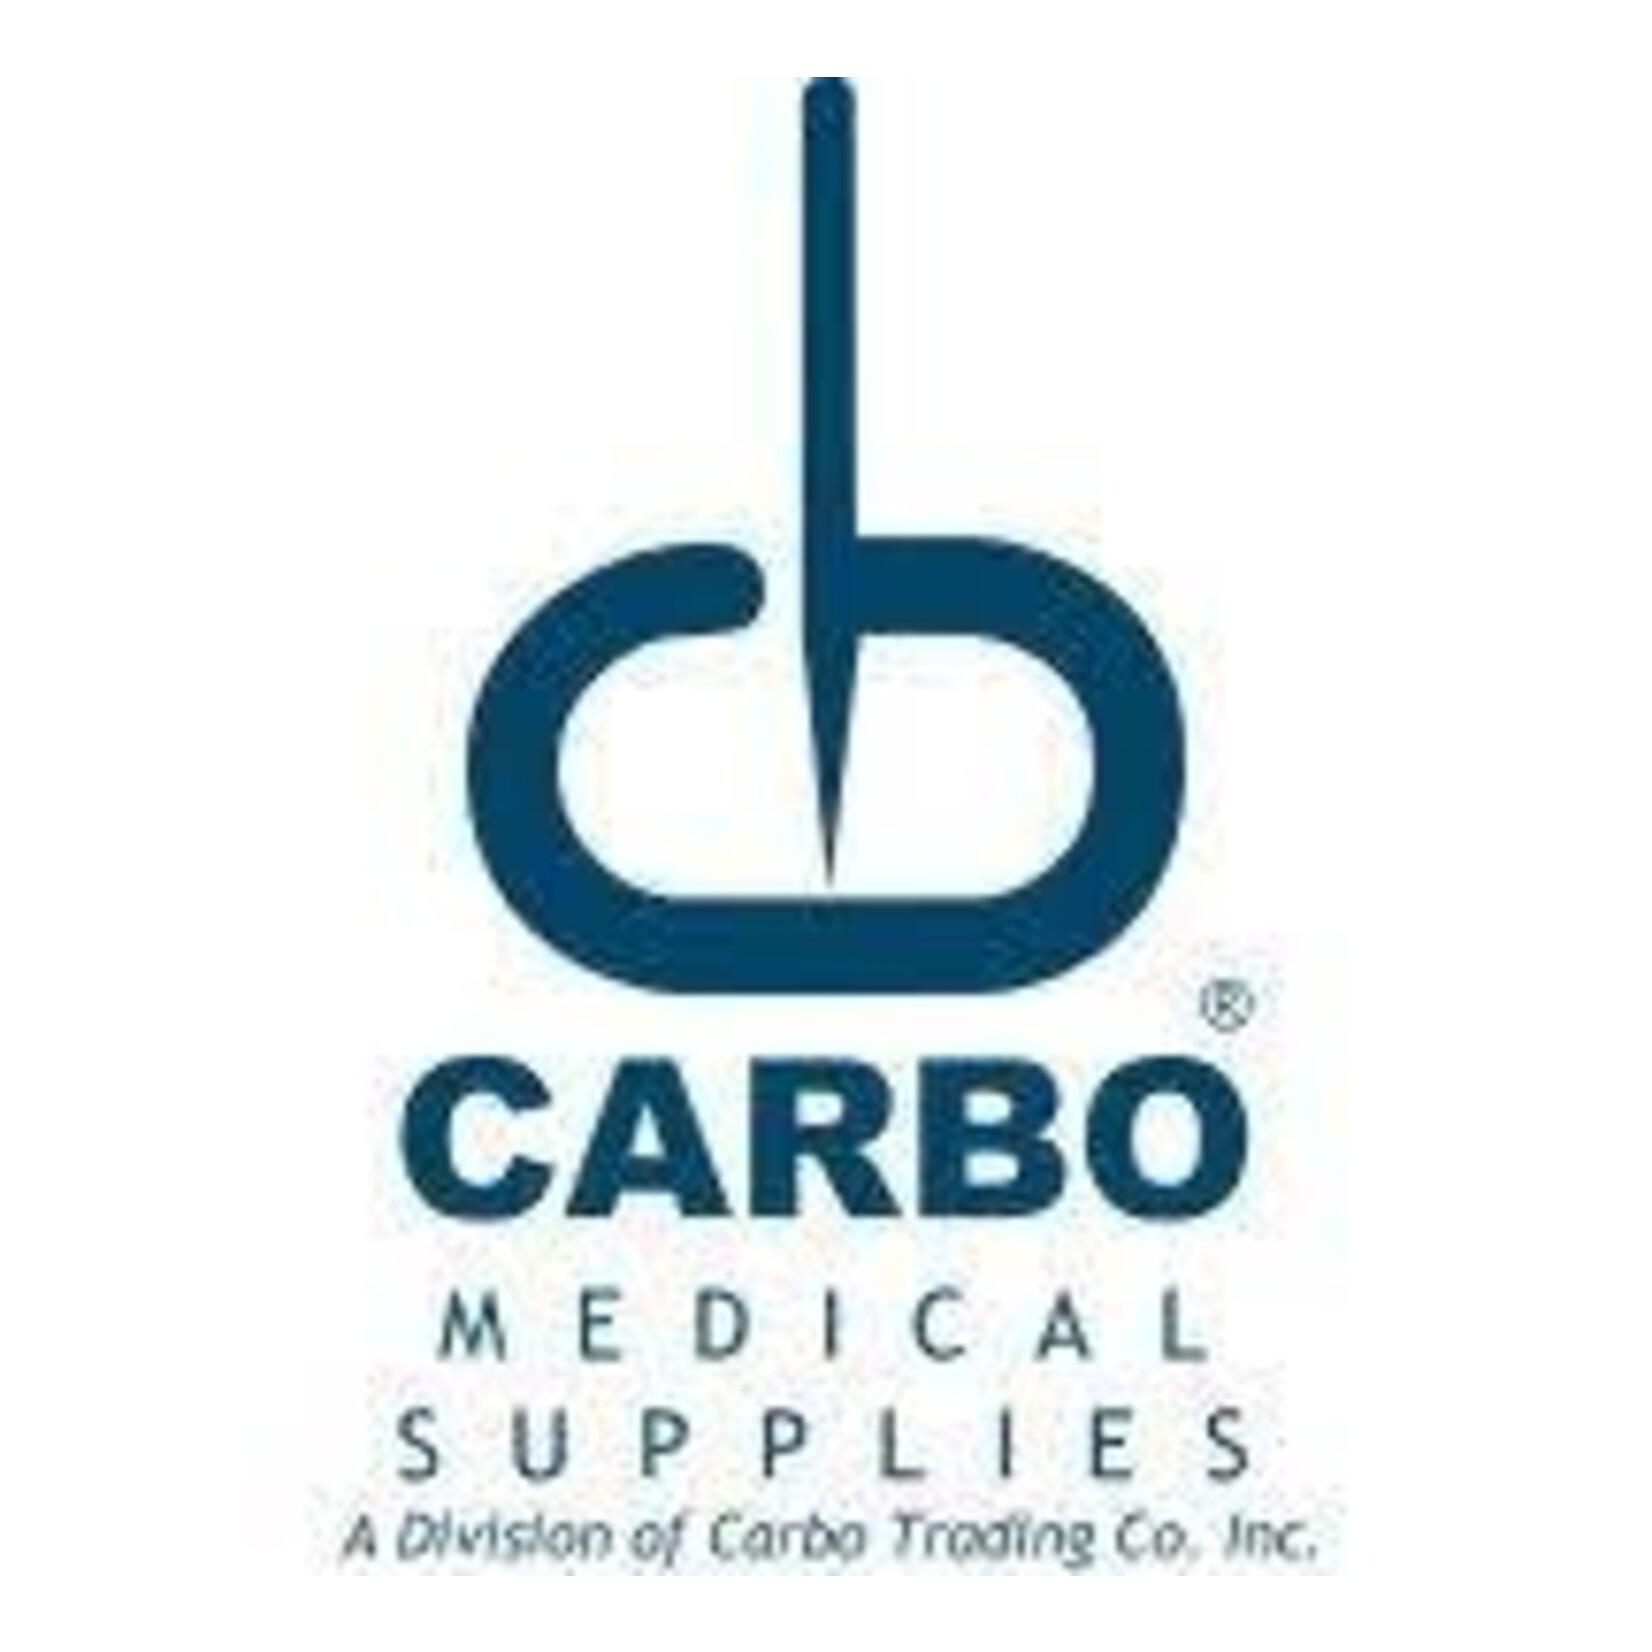 CARBO CARBO ACUPUNCTURE NEEDLE .20 x 40mm 100 PACK